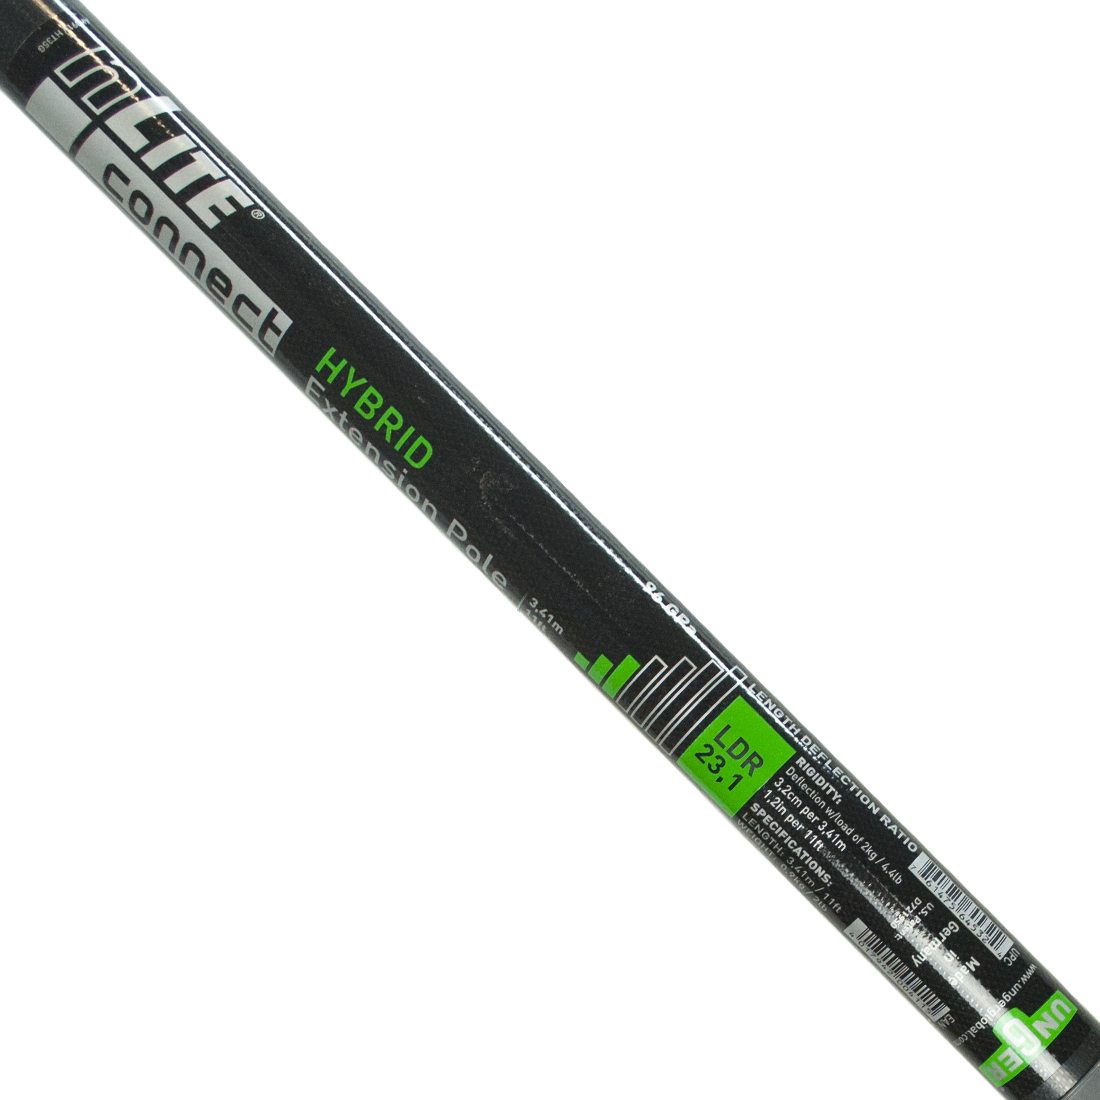 Unger nLite Hybrid Extension Pole - 11 Foot - Decal Close-Up View